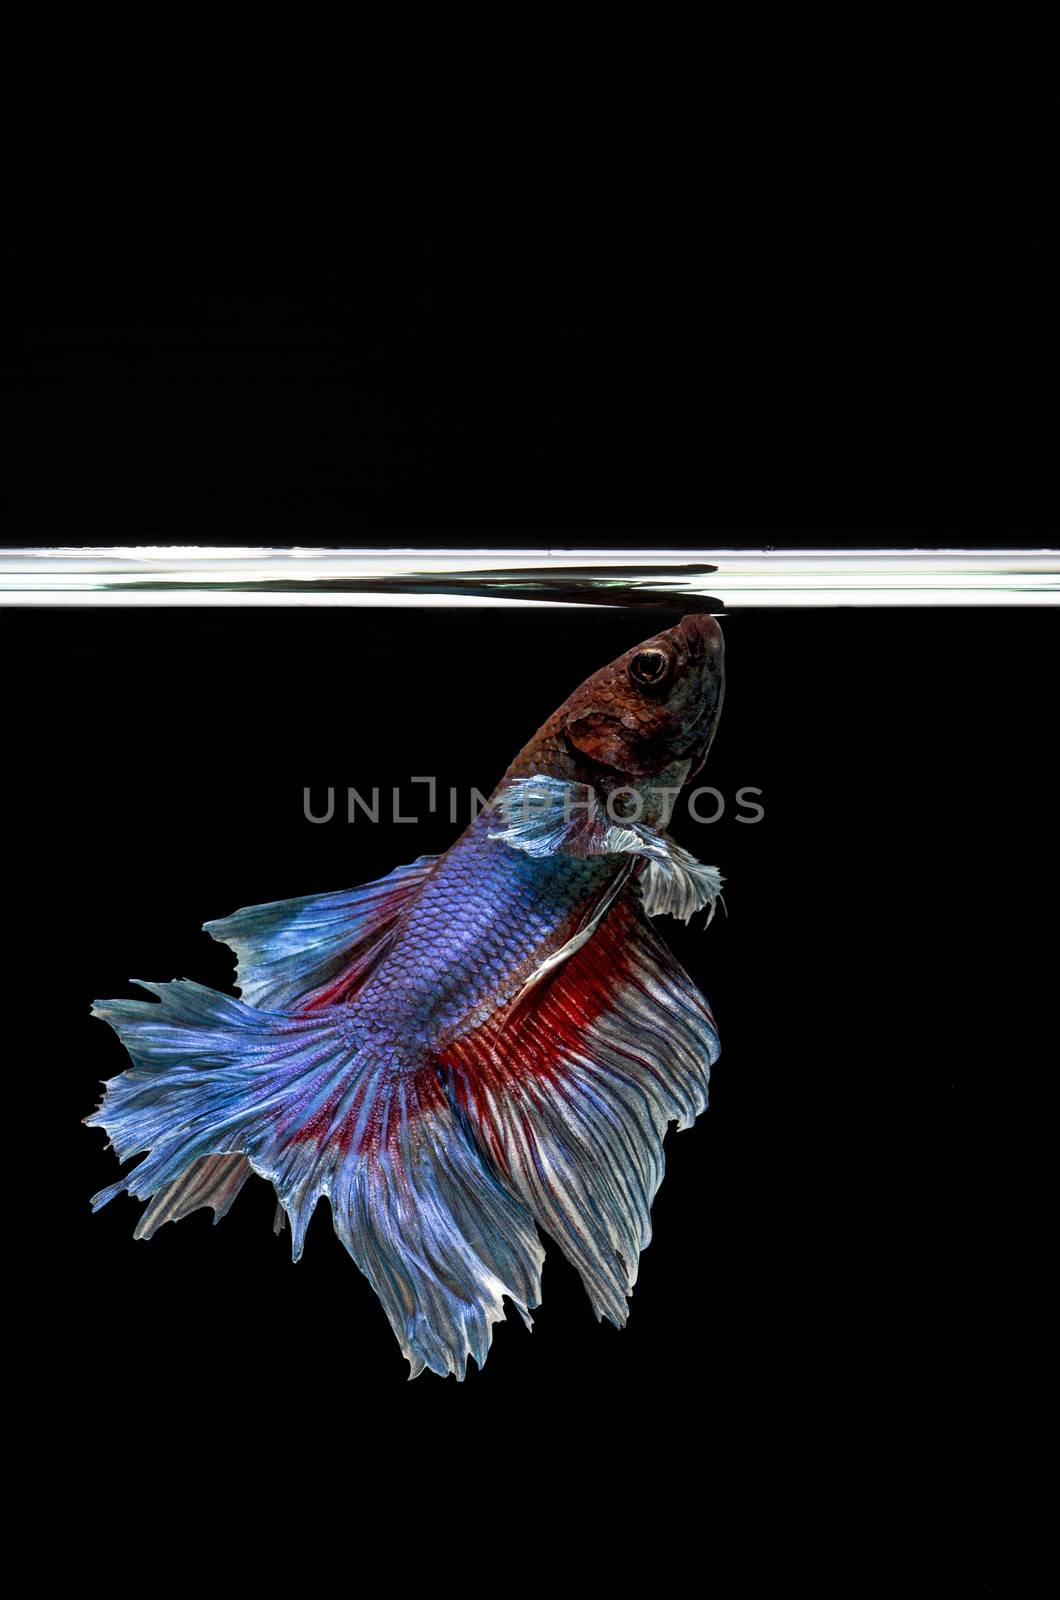 Siamese Fighting Fish isolated , betta on black background:  Clipping path included